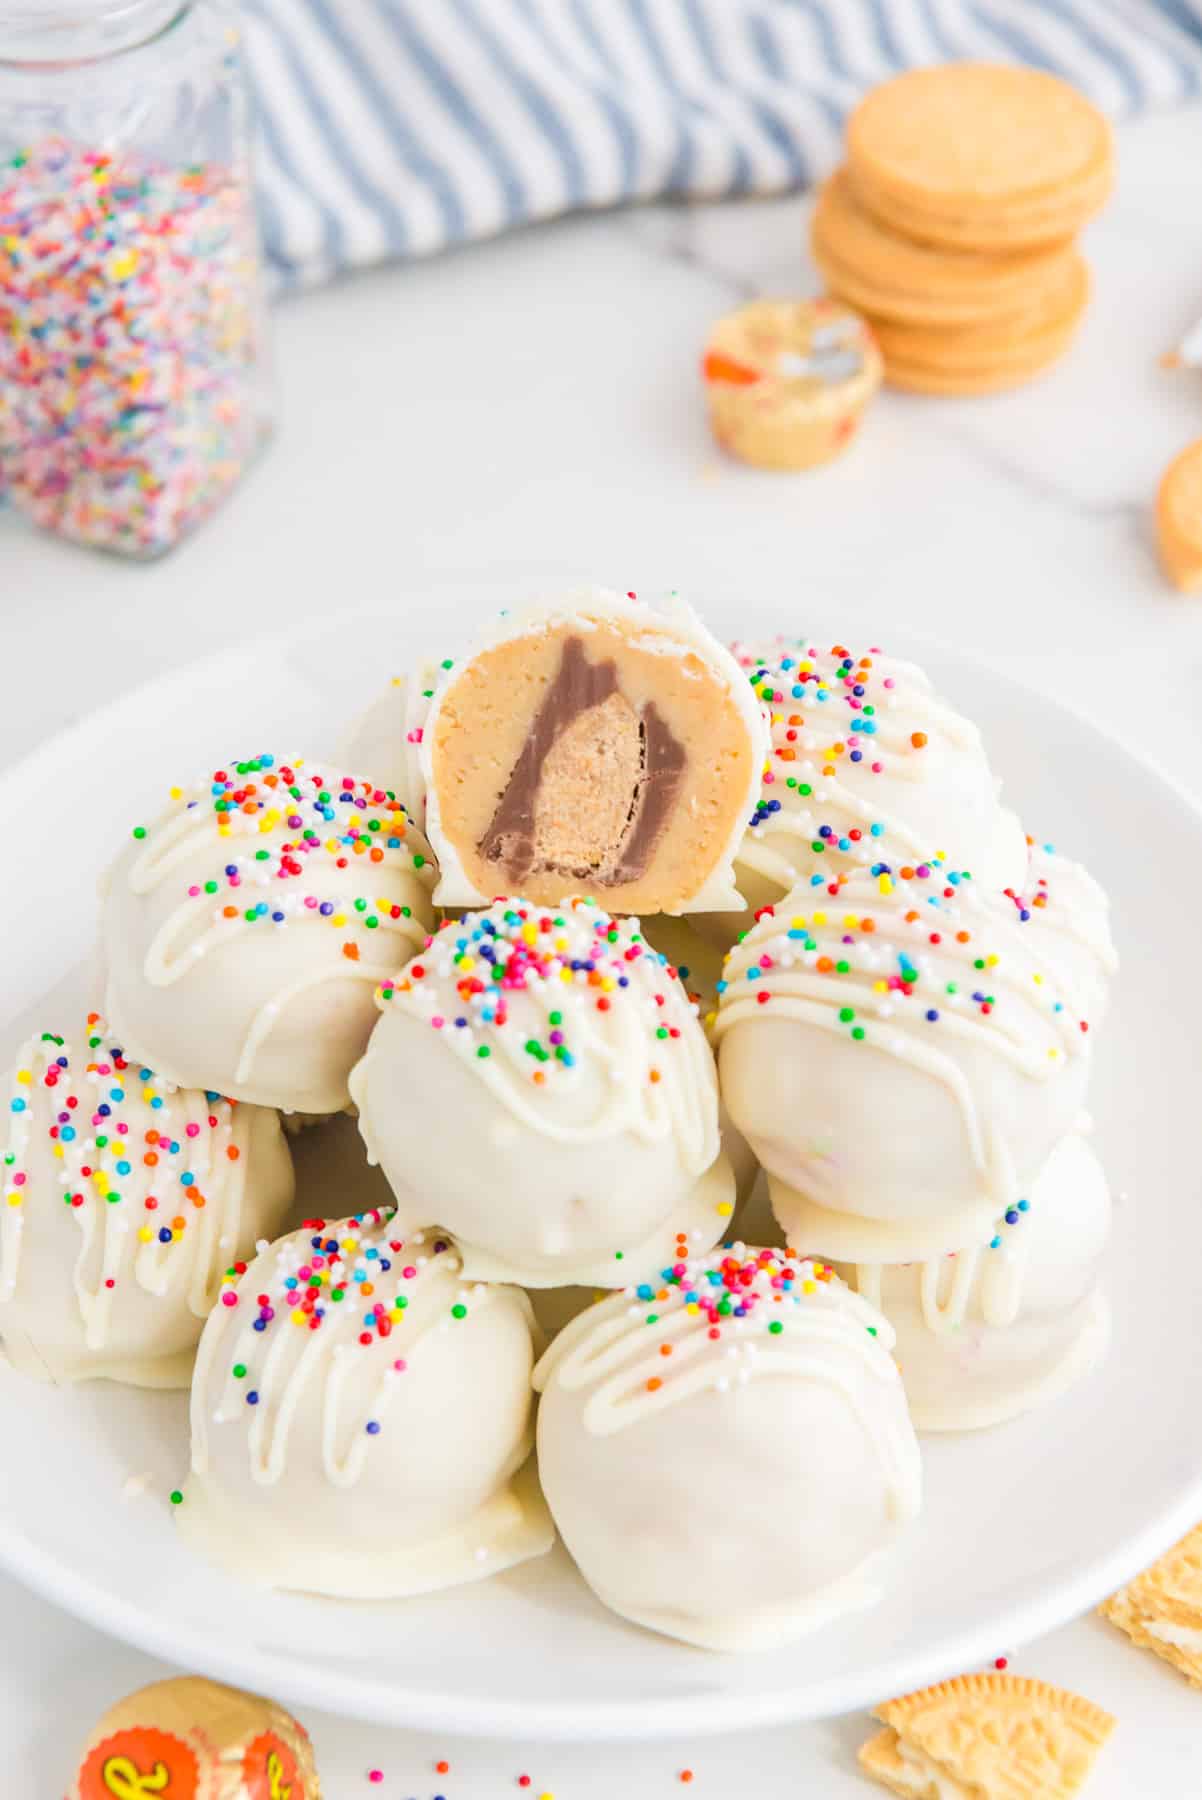 A plate of white chocolate truffles topped with sprinkles with a bite taken out of the top one showing a peanut butter cup inside.